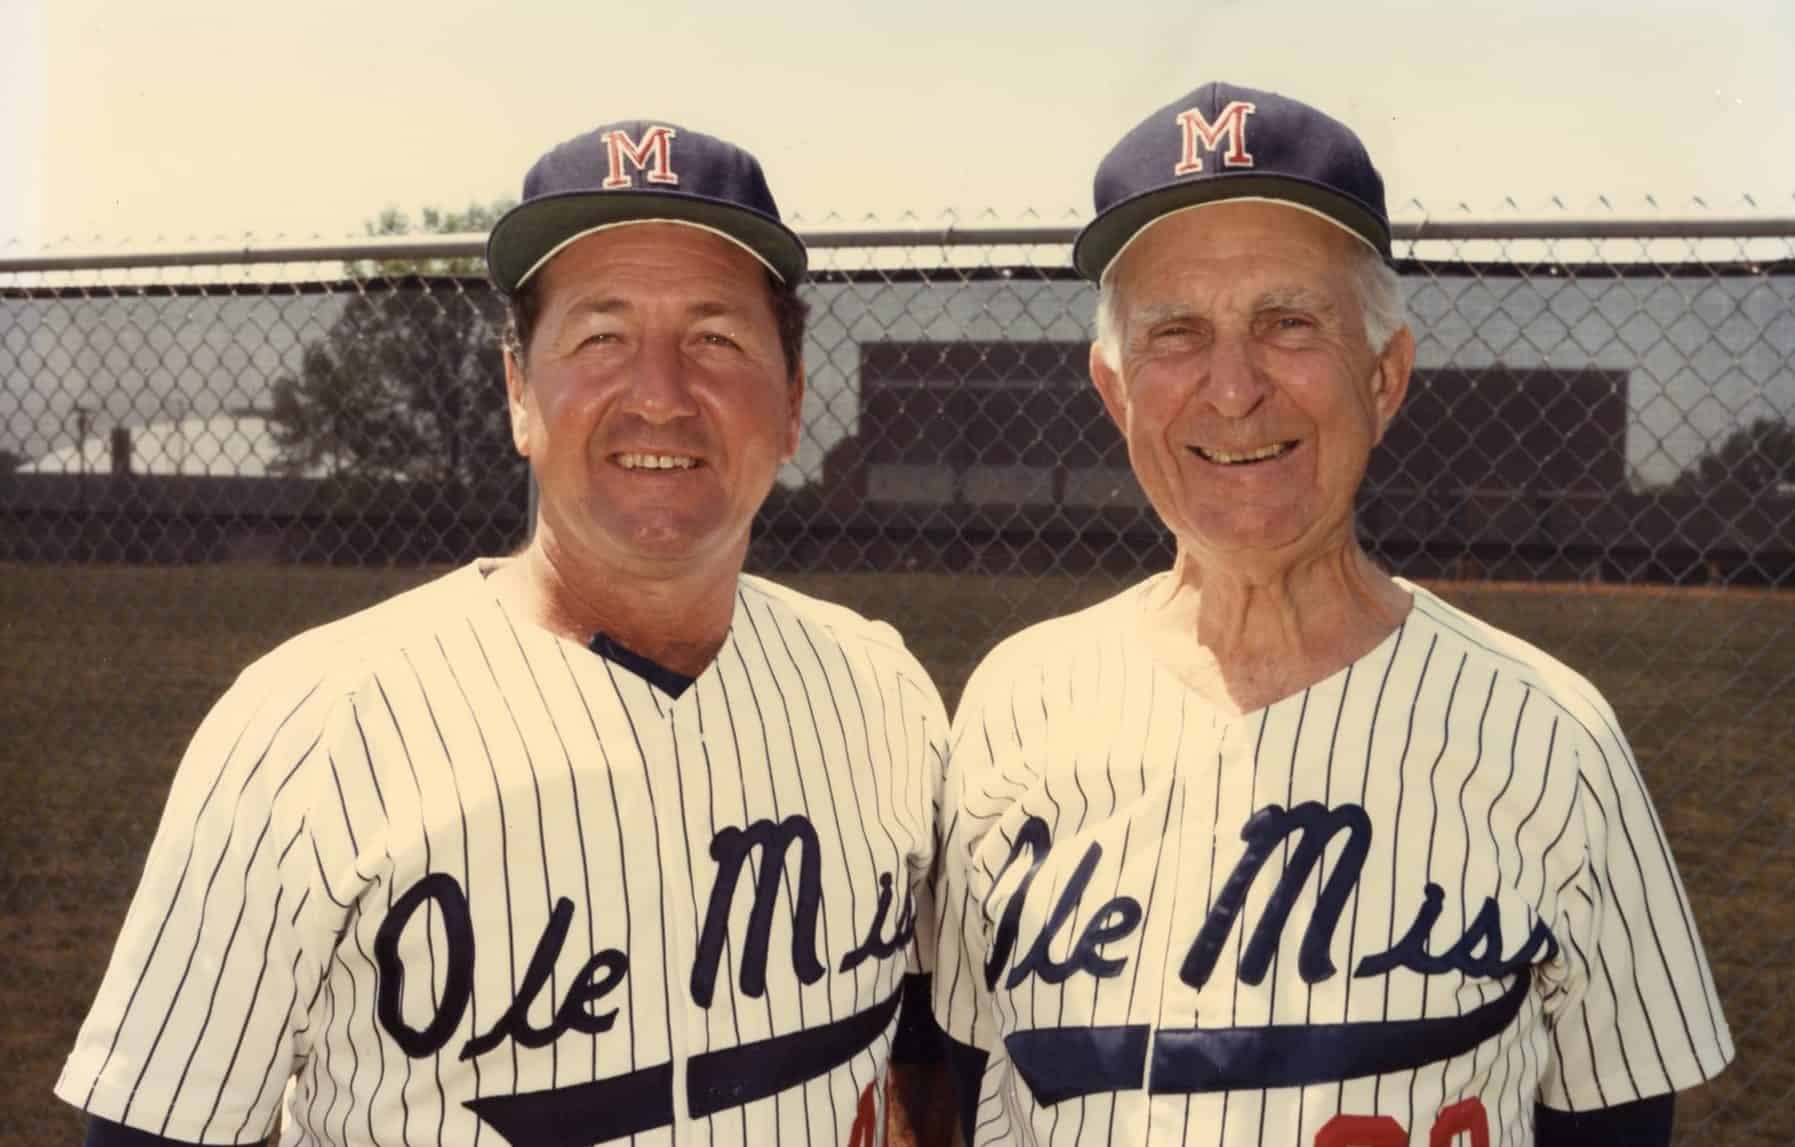 In the heart of football country, Ole Miss’ enduring baseball tradition shines